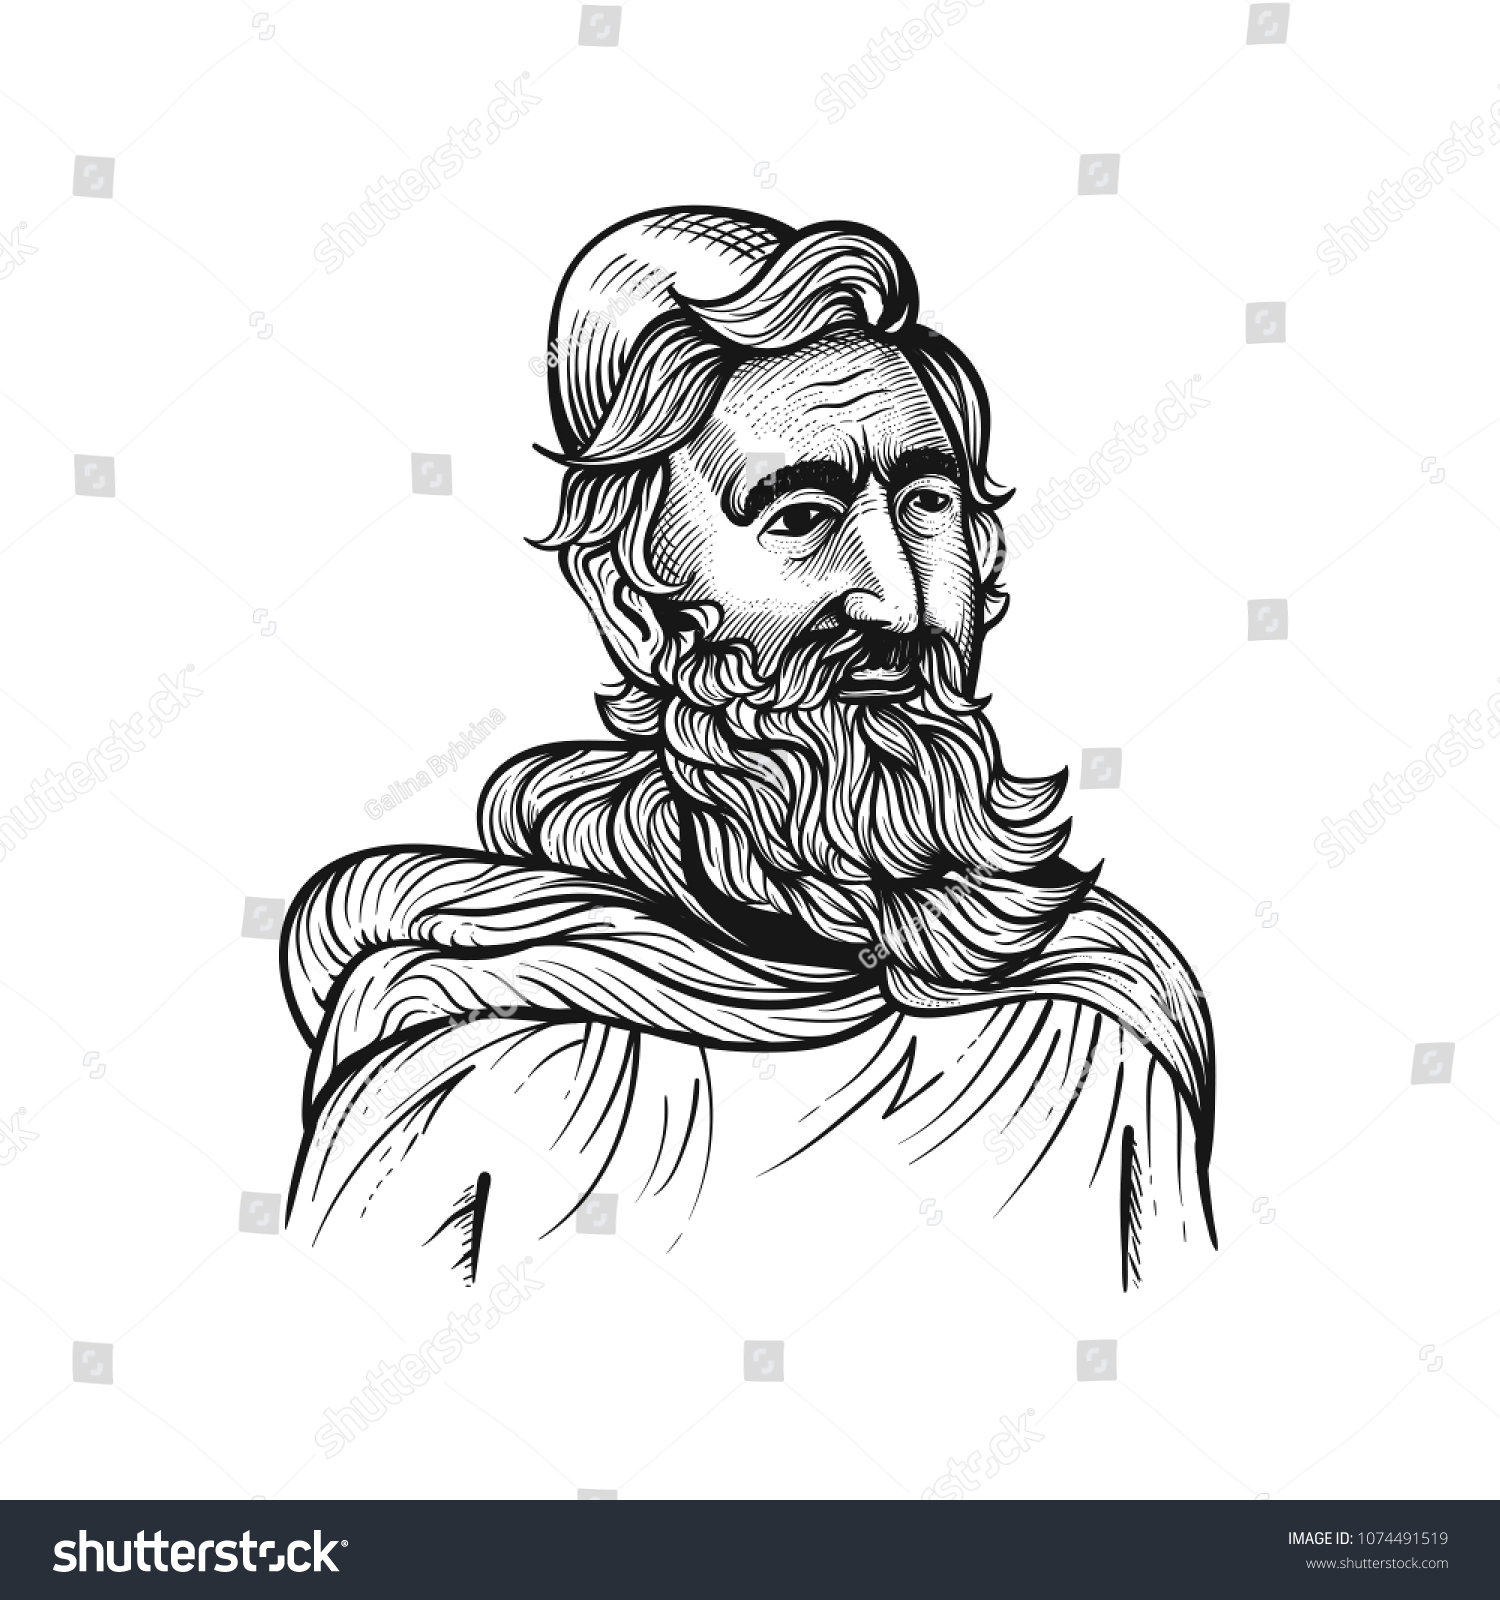 Medieval Old Rabbi Engraving Style Sketch Stock Vector (Royalty Free ...